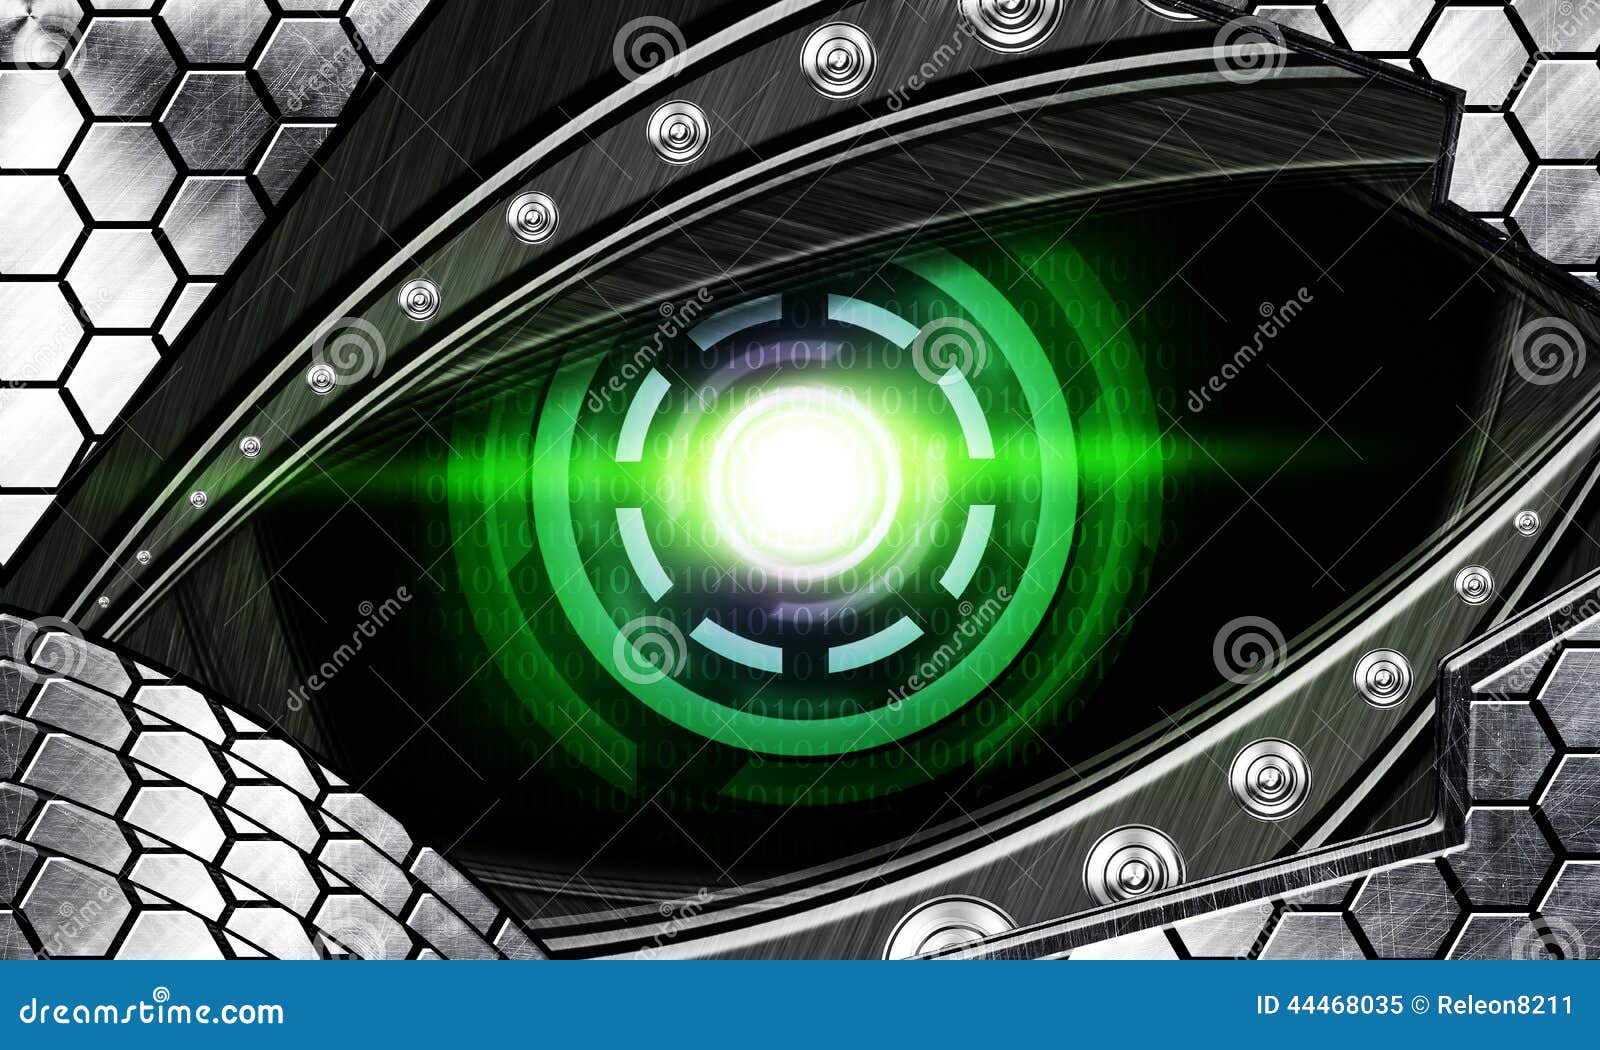 Robot Stock - Free & Royalty-Free Stock Photos from Dreamstime